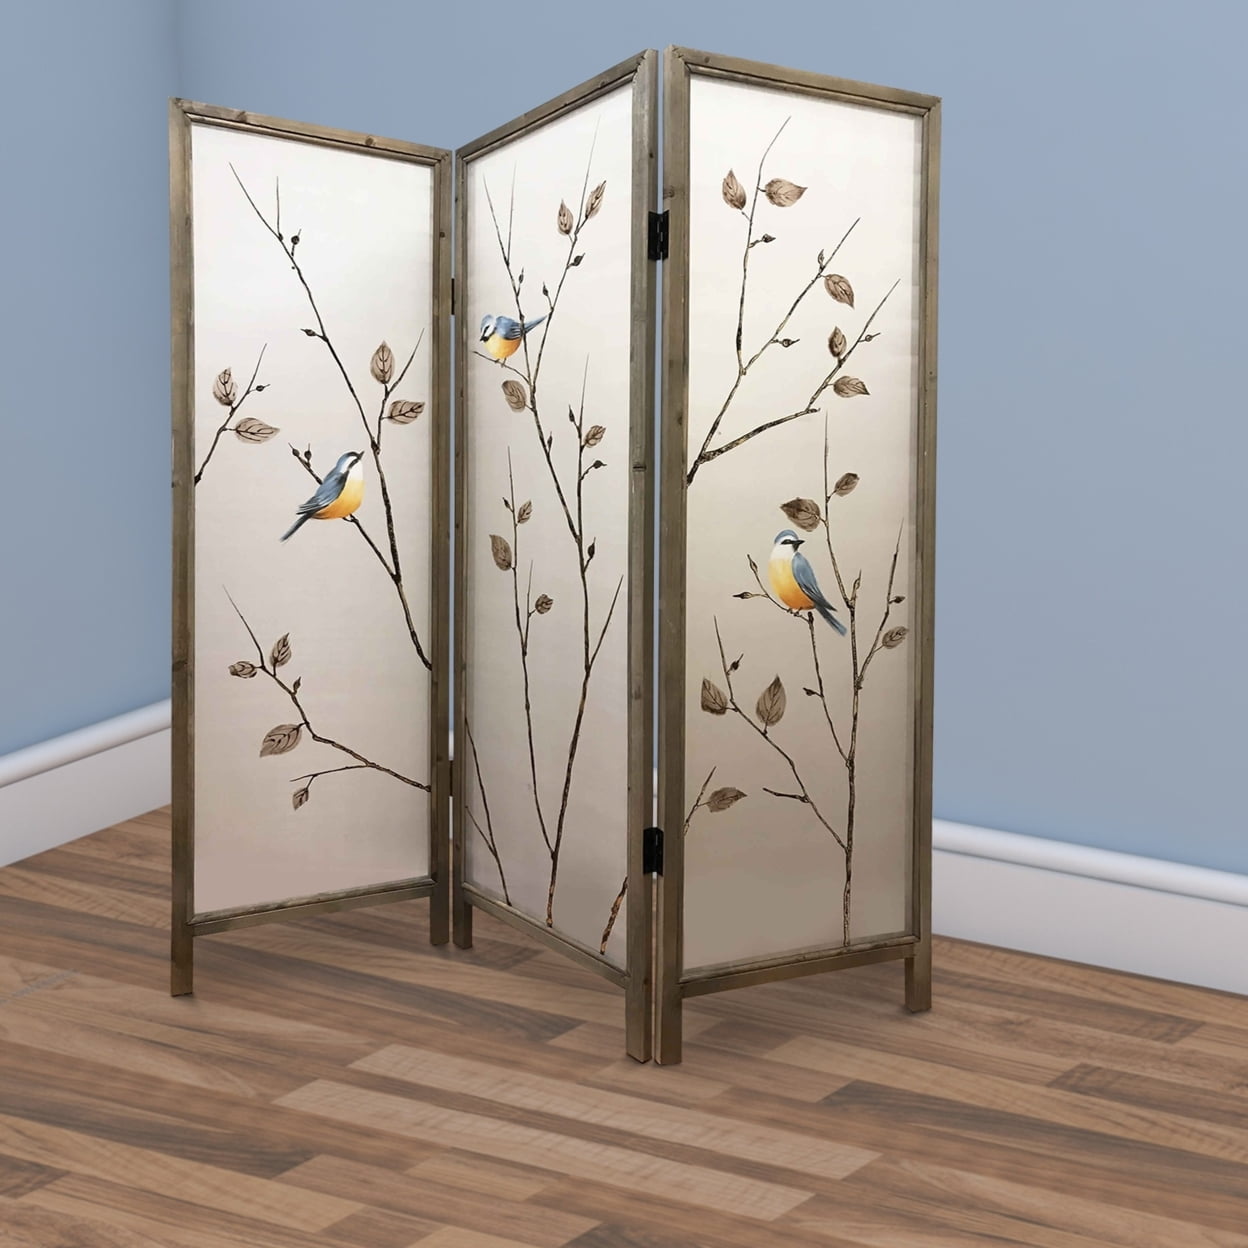 Picture of Benzara BM205893 Art Styled 3 Panel Wooden Screen with Hand painted Fabric Design, Beige